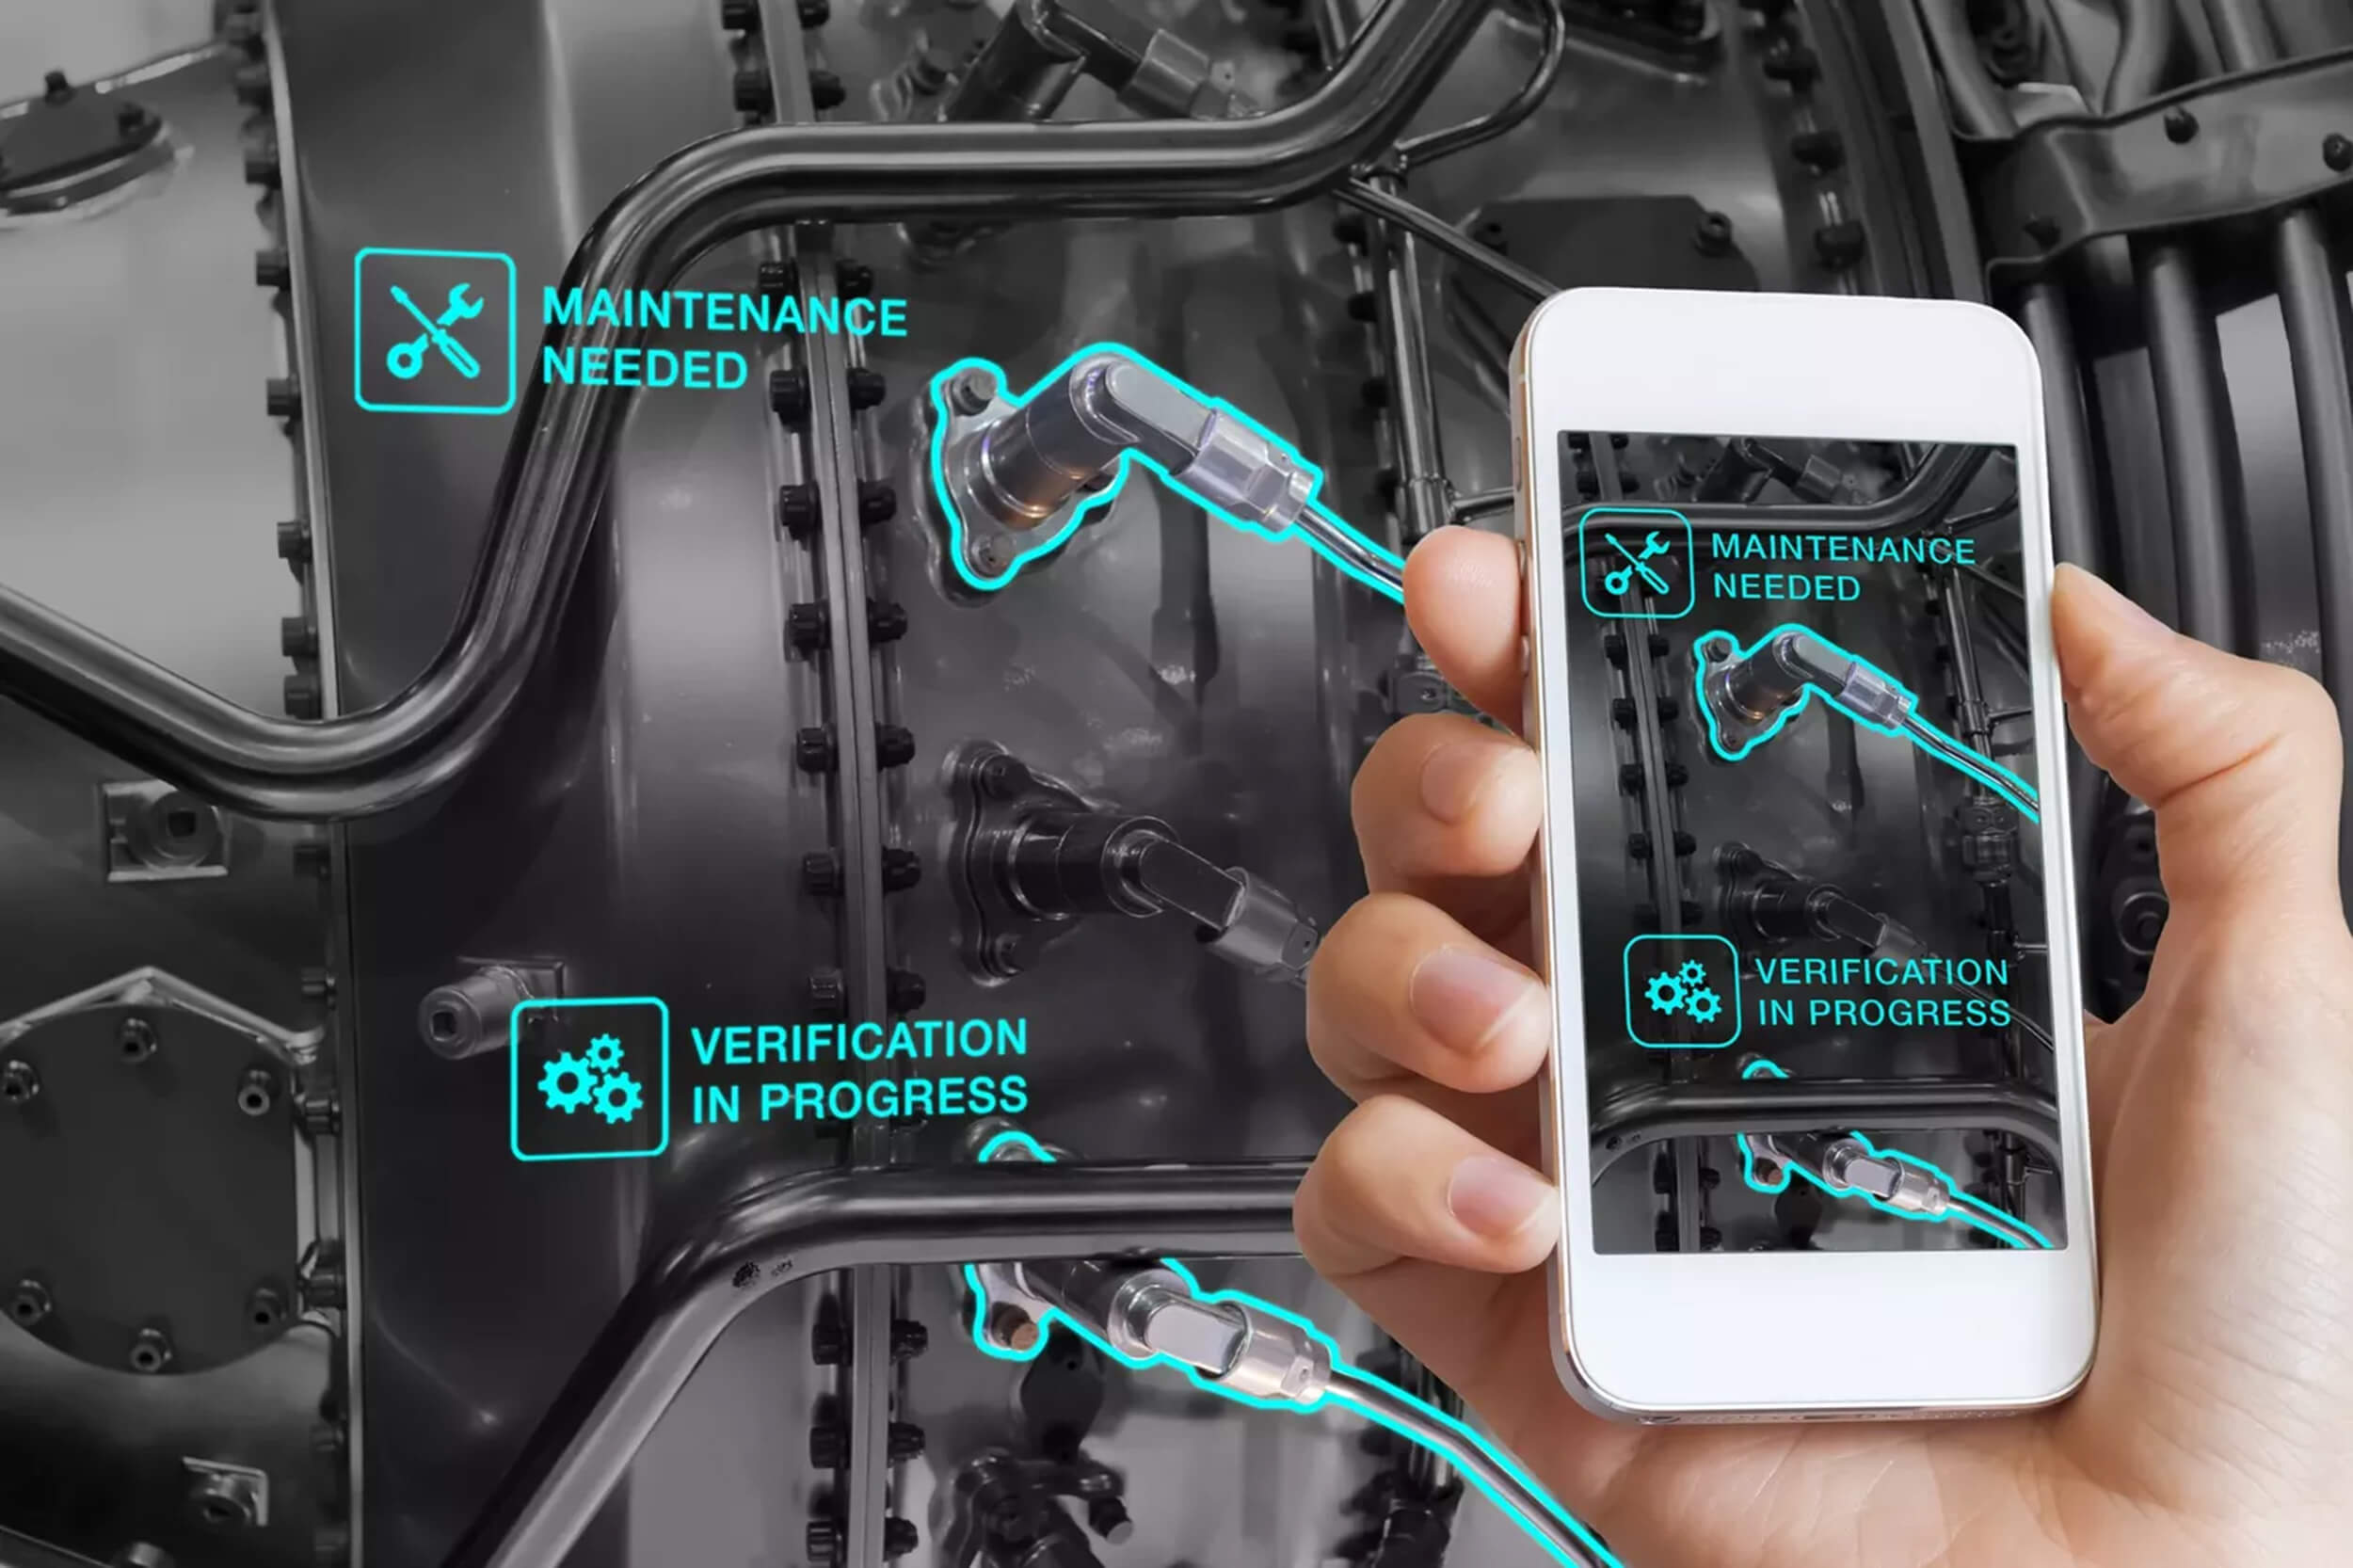 Augmented reality can assist field service technicians by identifying equipment parts that needs repair